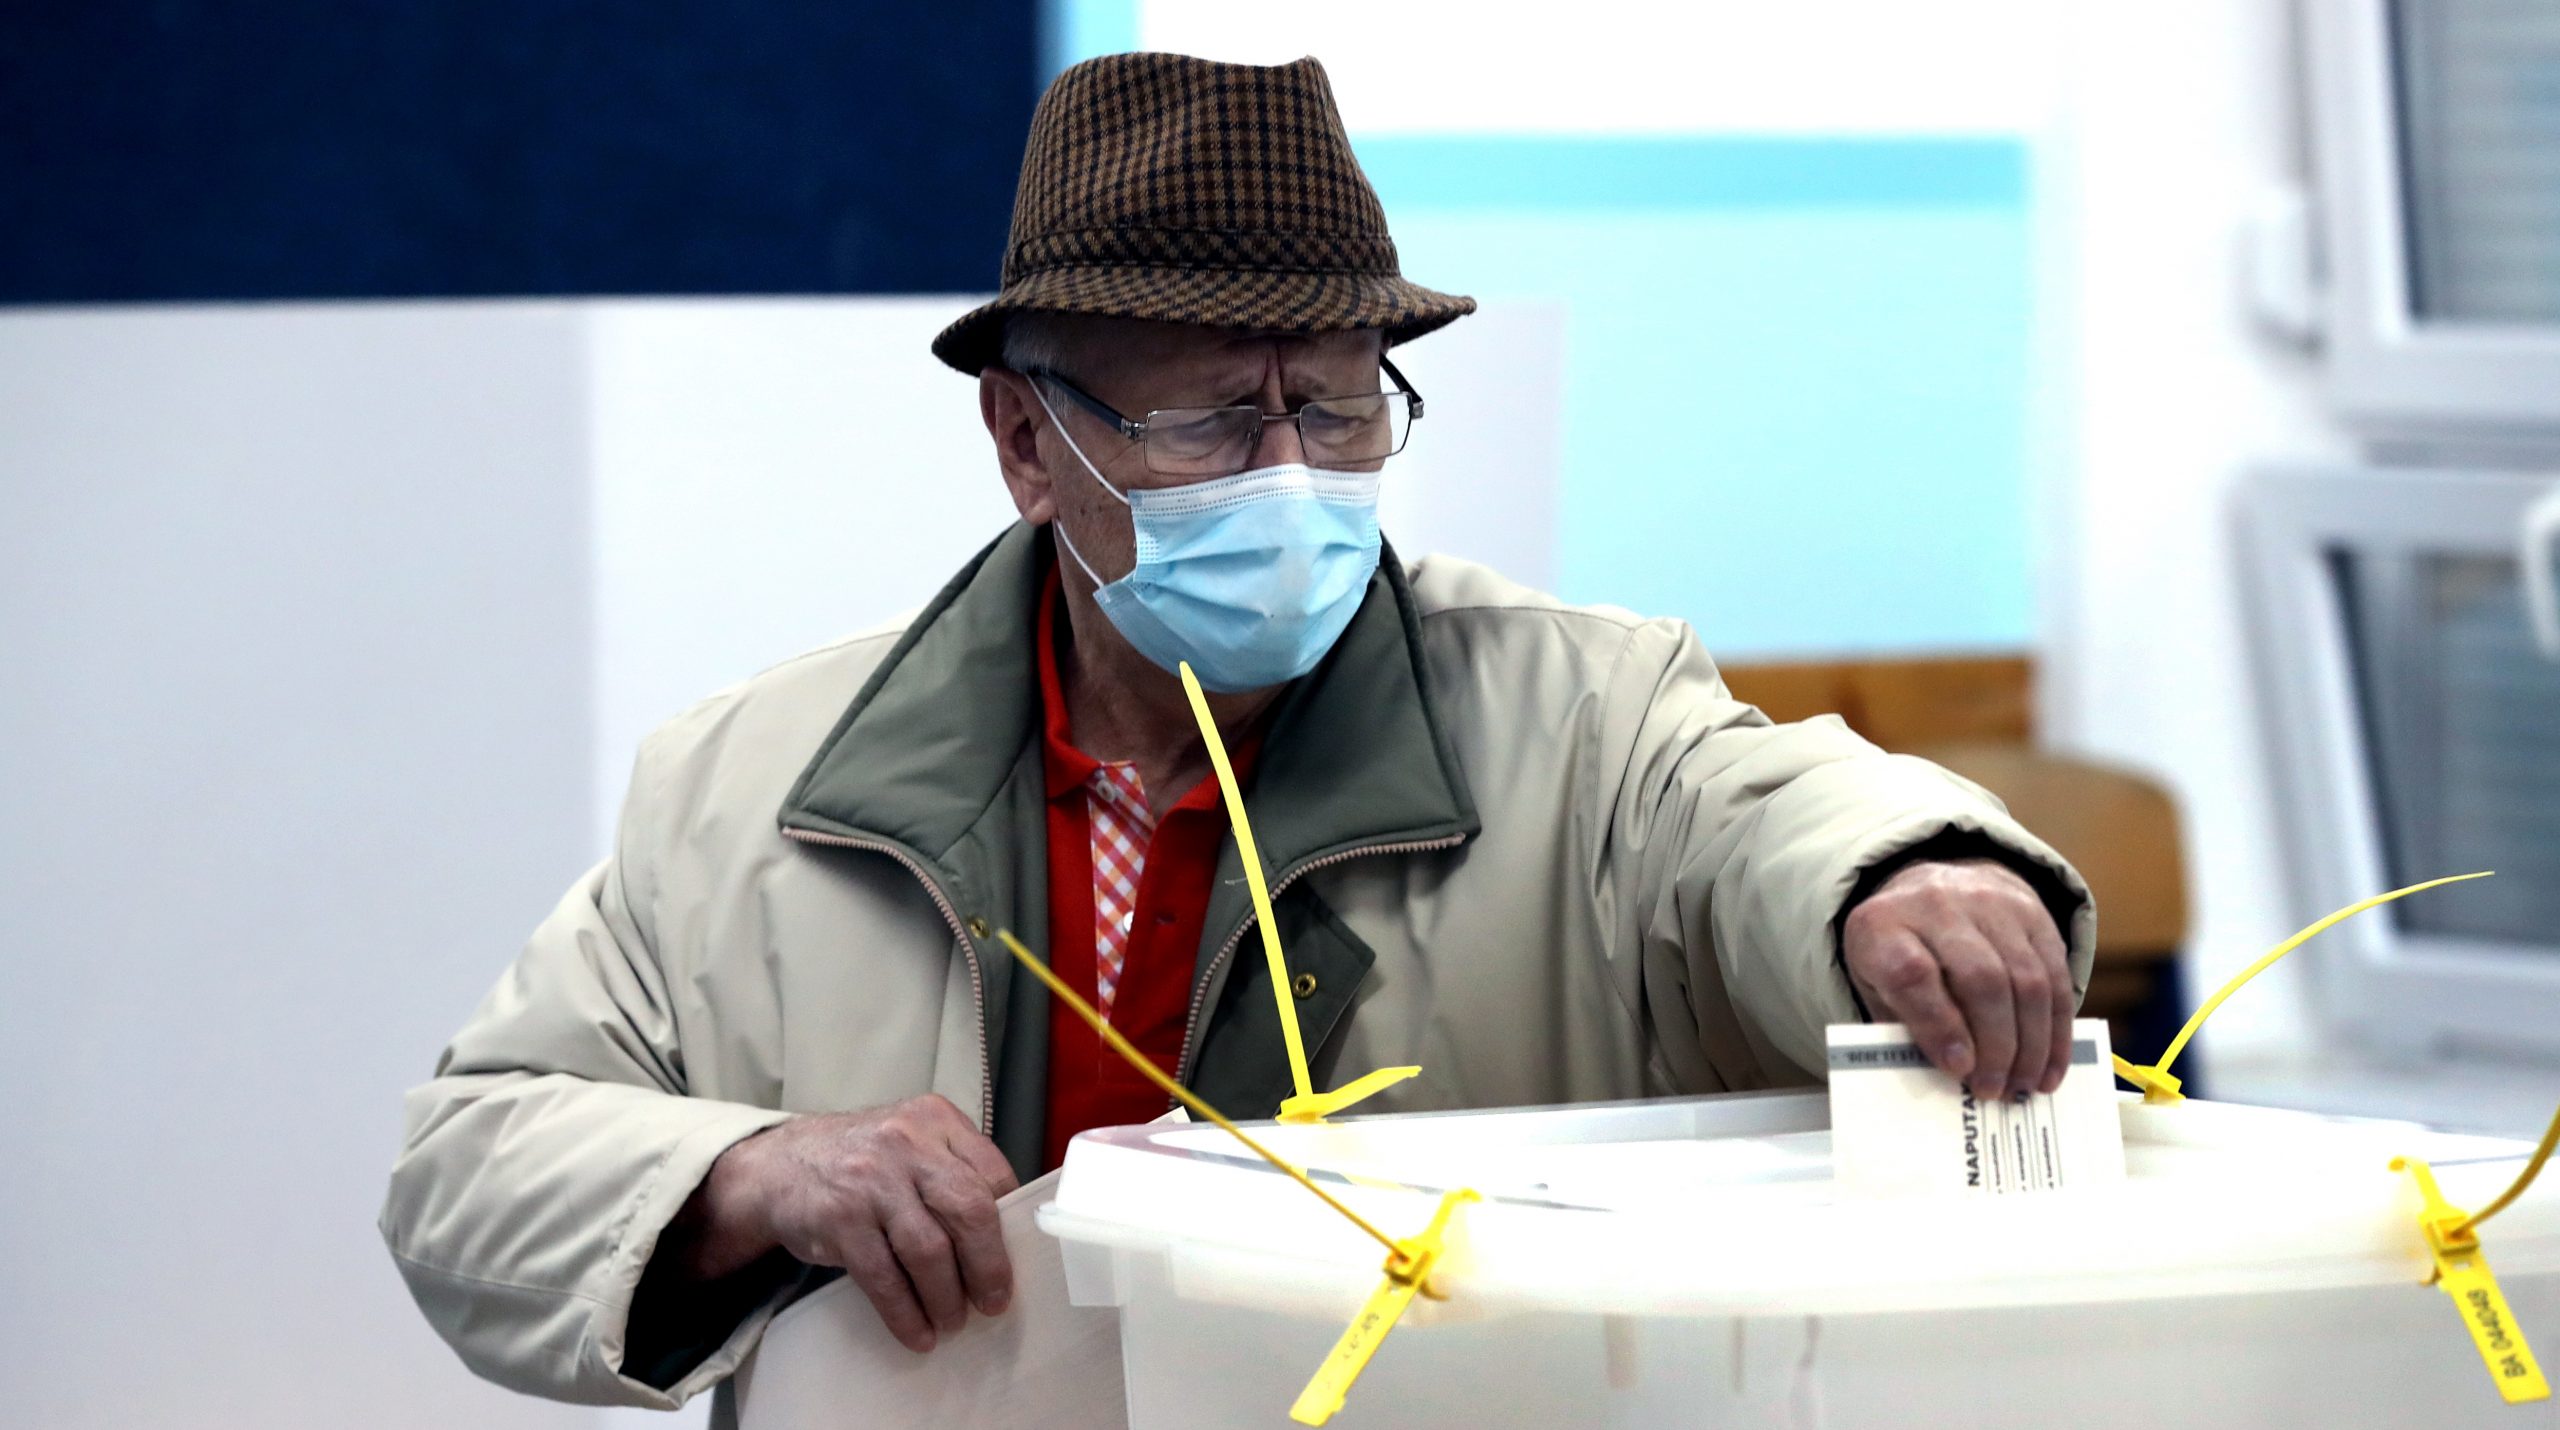 epa08821230 A voter wears a face mask as he casts his ballot for the local elections in Sarajevo, Bosnia and Herzegovina, 15 November 2020. More than three million Bosnian citizens are expected to vote in the country's Local elections.  EPA/FEHIM DEMIR